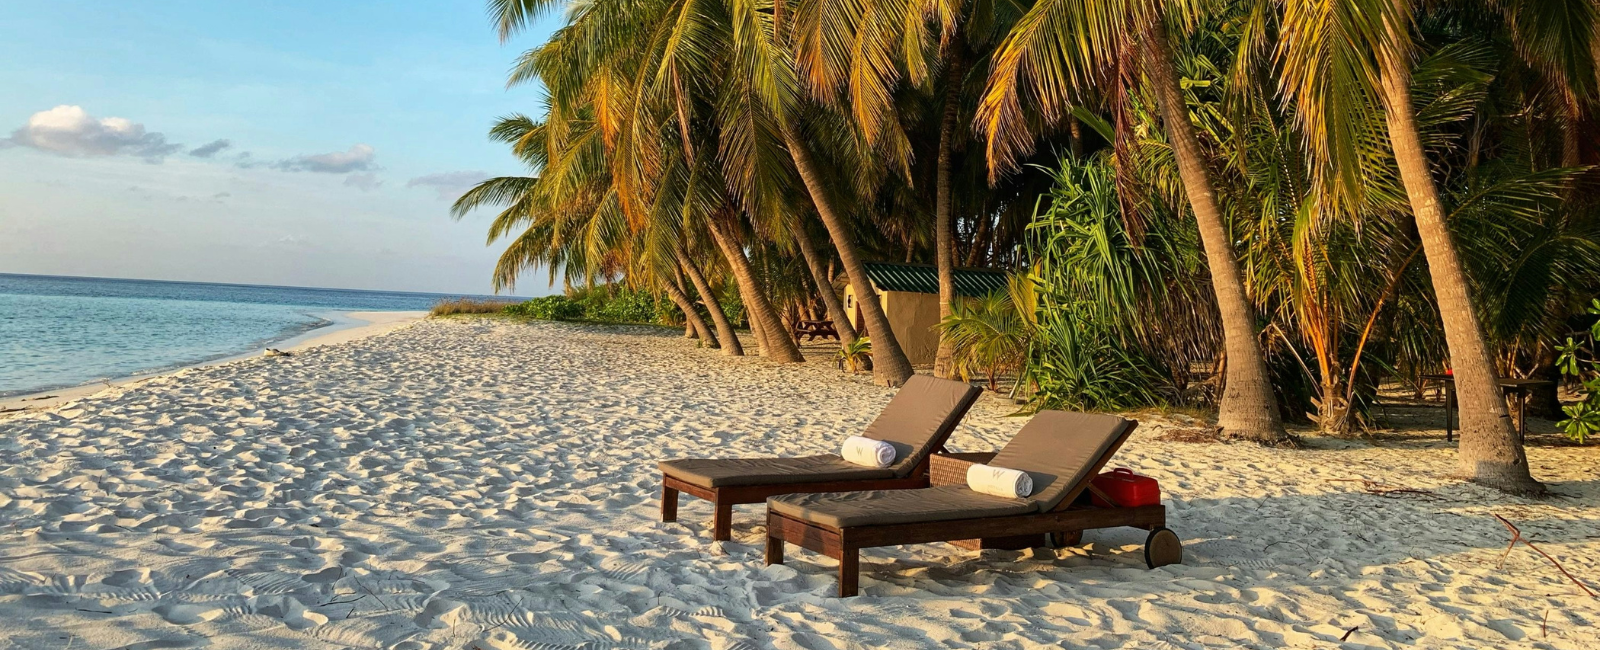 Lounge chairs for a couple on the sand in the Maldives